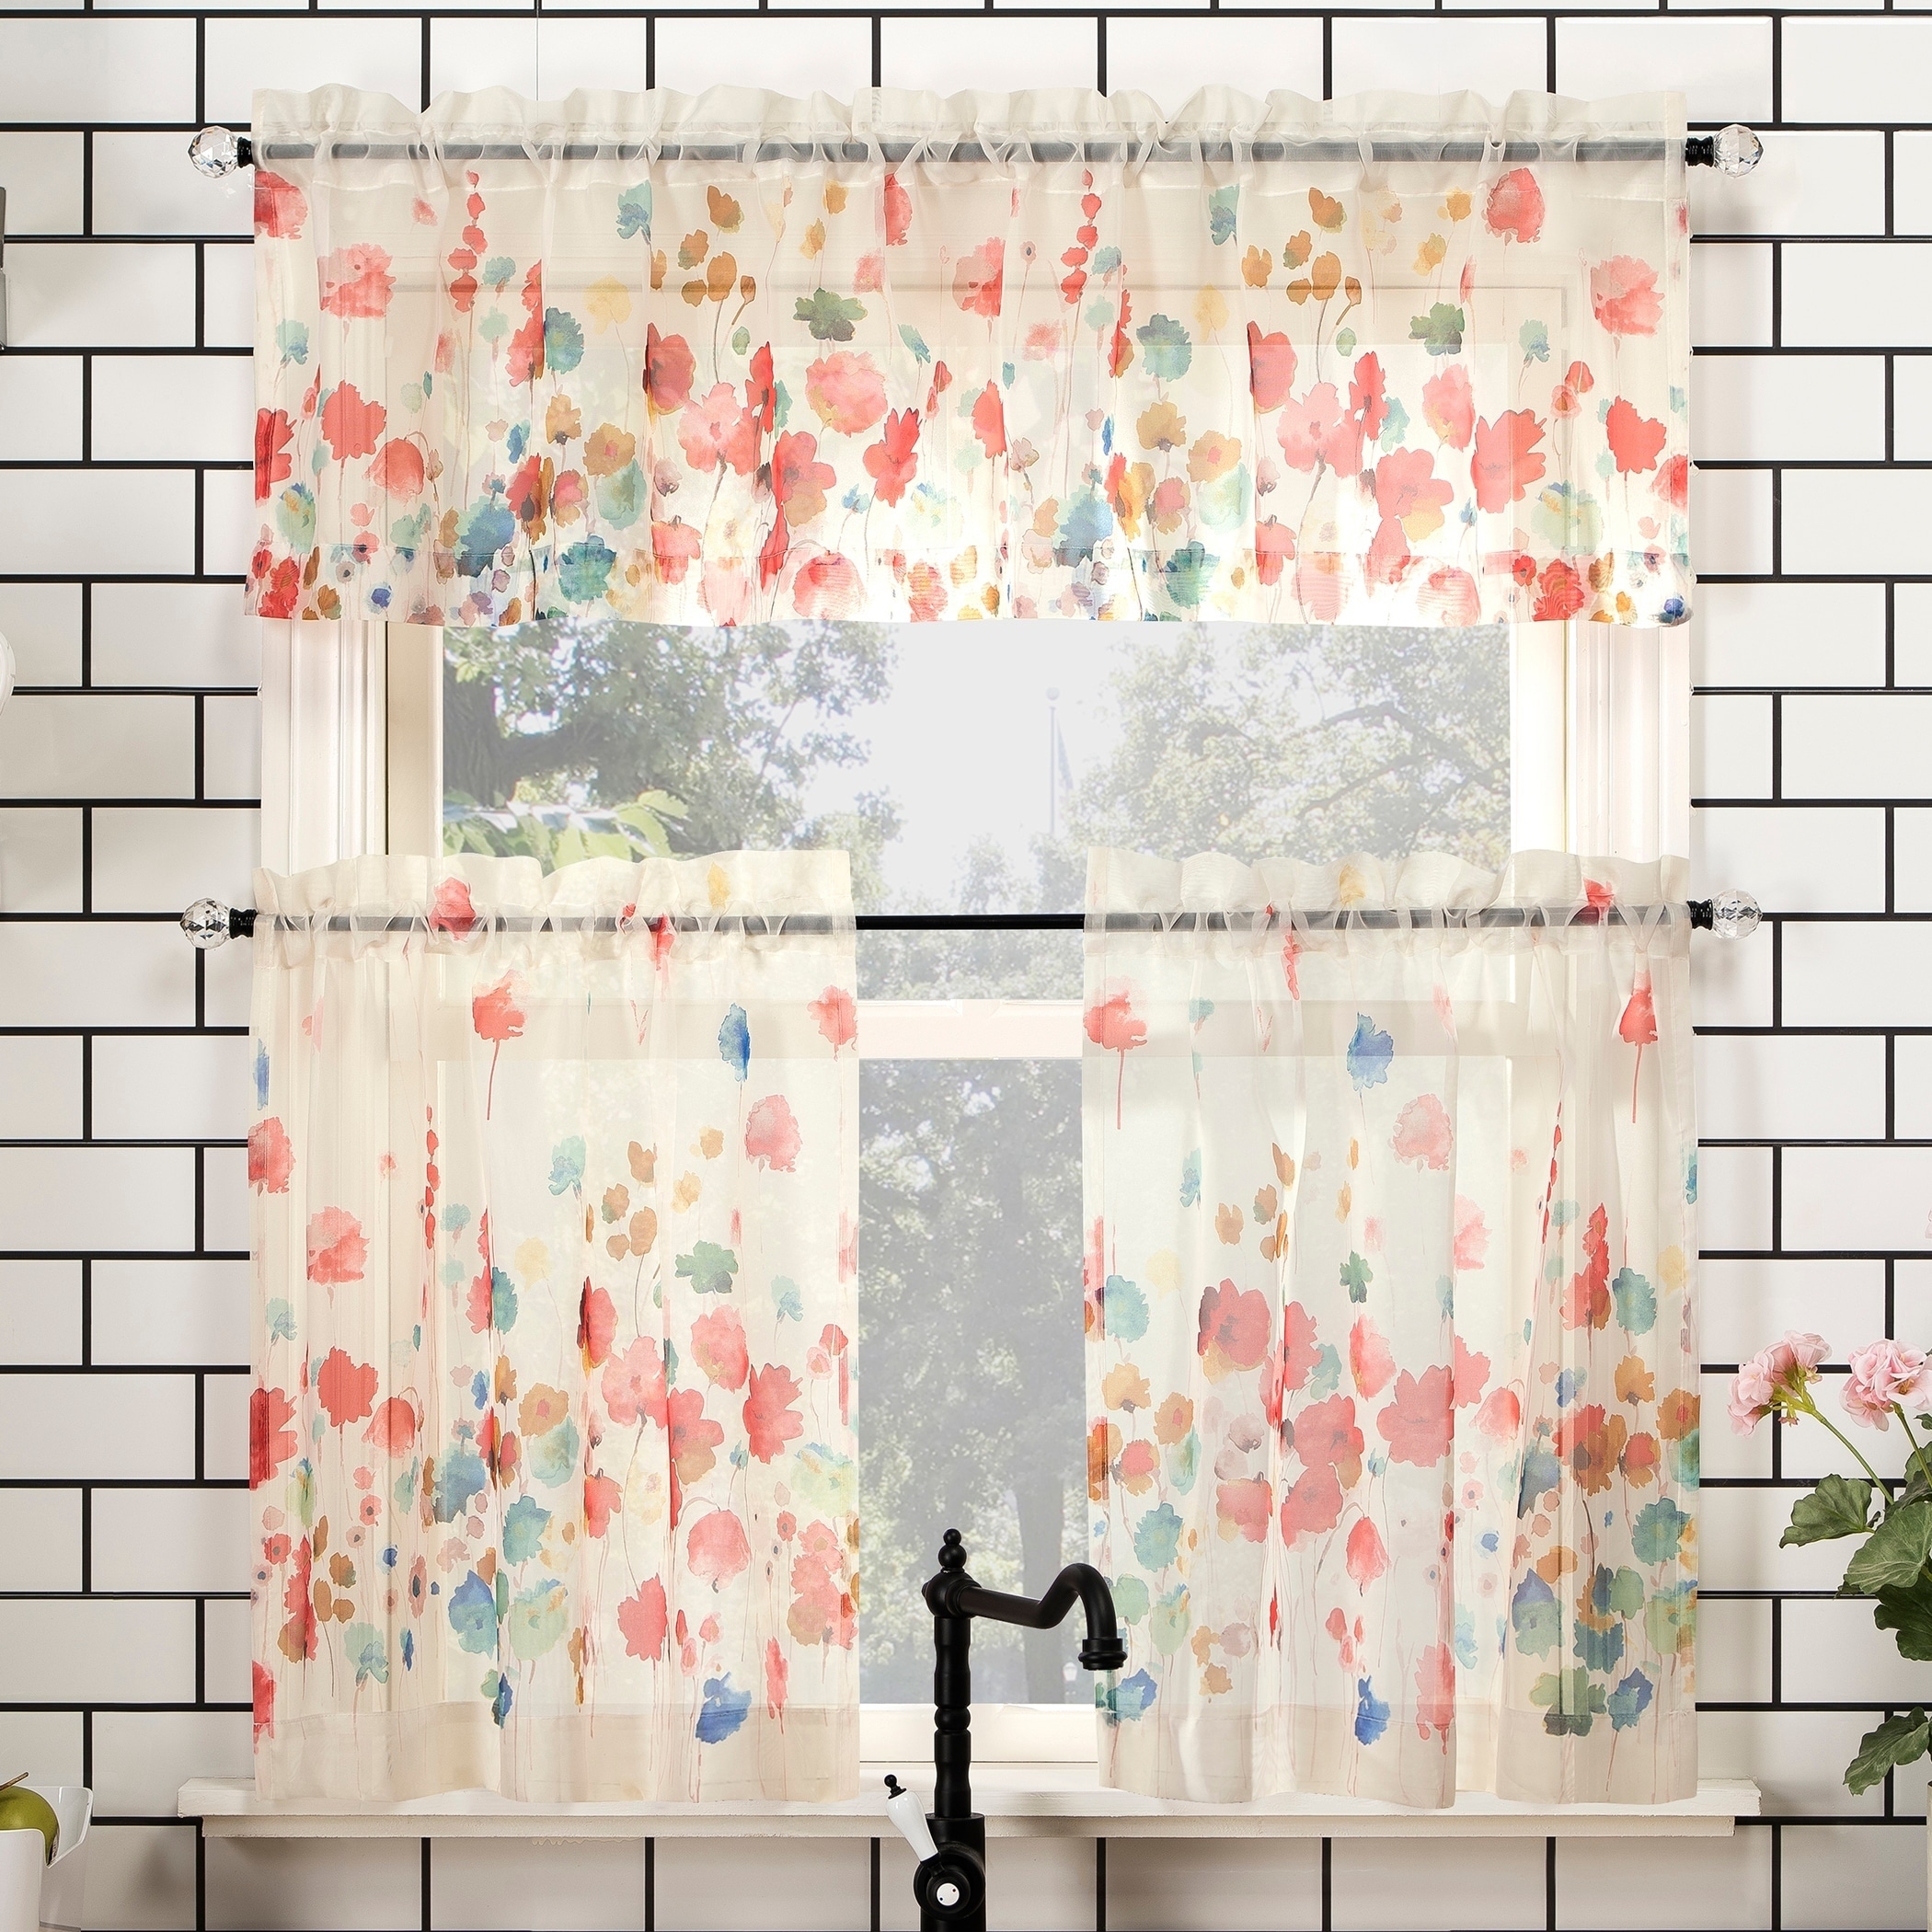 Lace Sheer Window Cafe Curtain Rod Pocket Floral Room Kitchen Valance Home Decor 